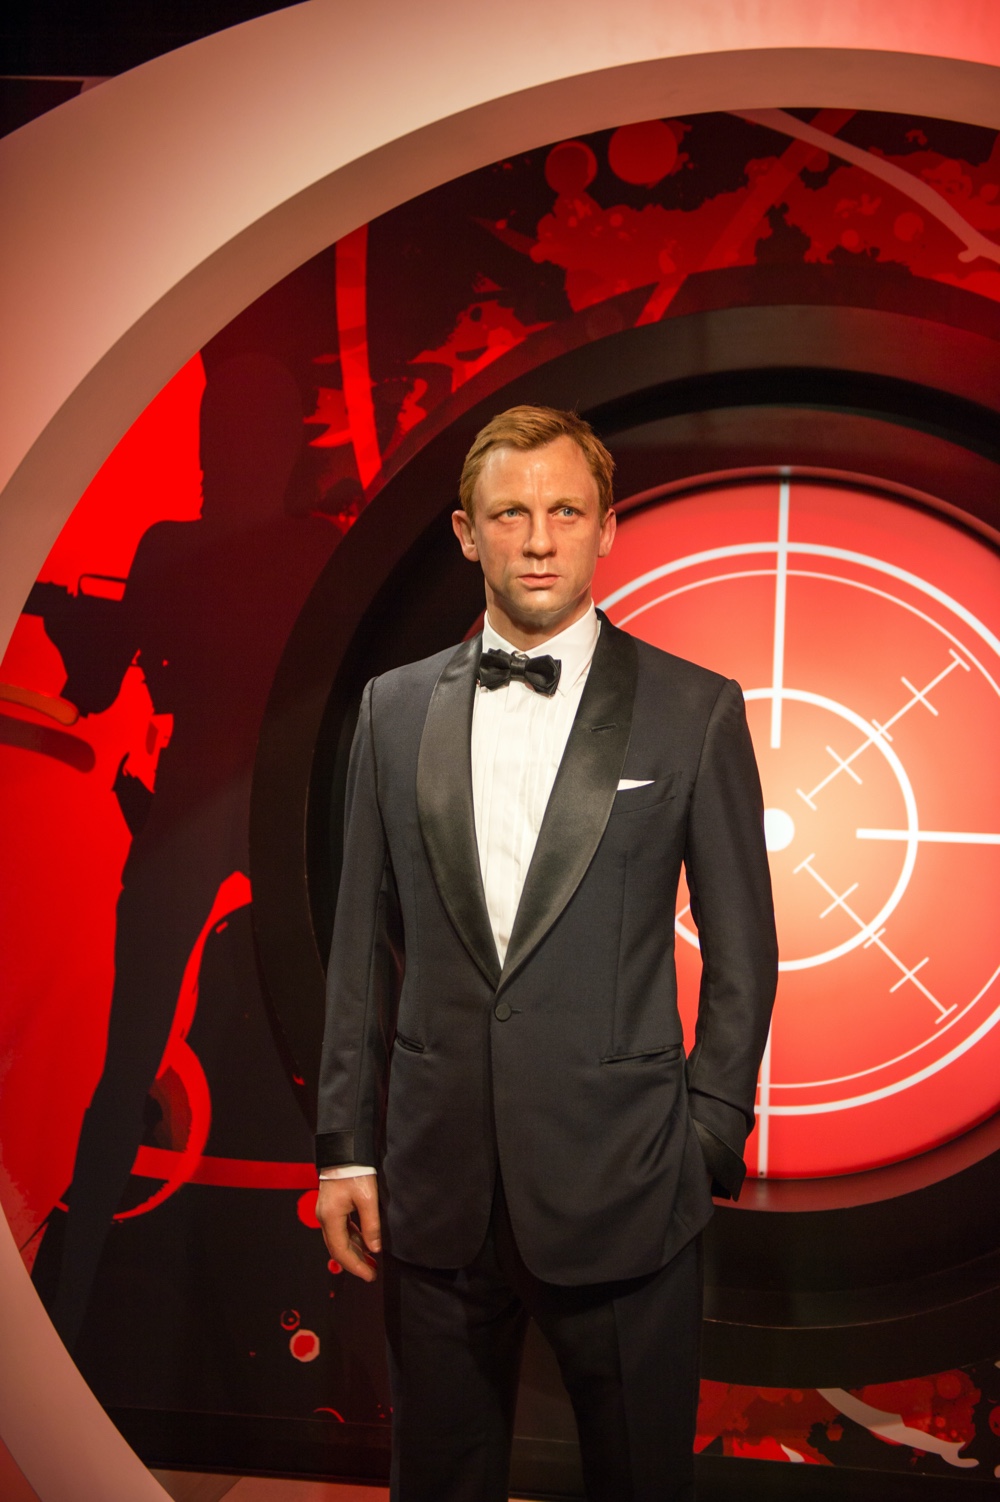 James Bond Swag: The Classiest 007 Outfits Of All Time